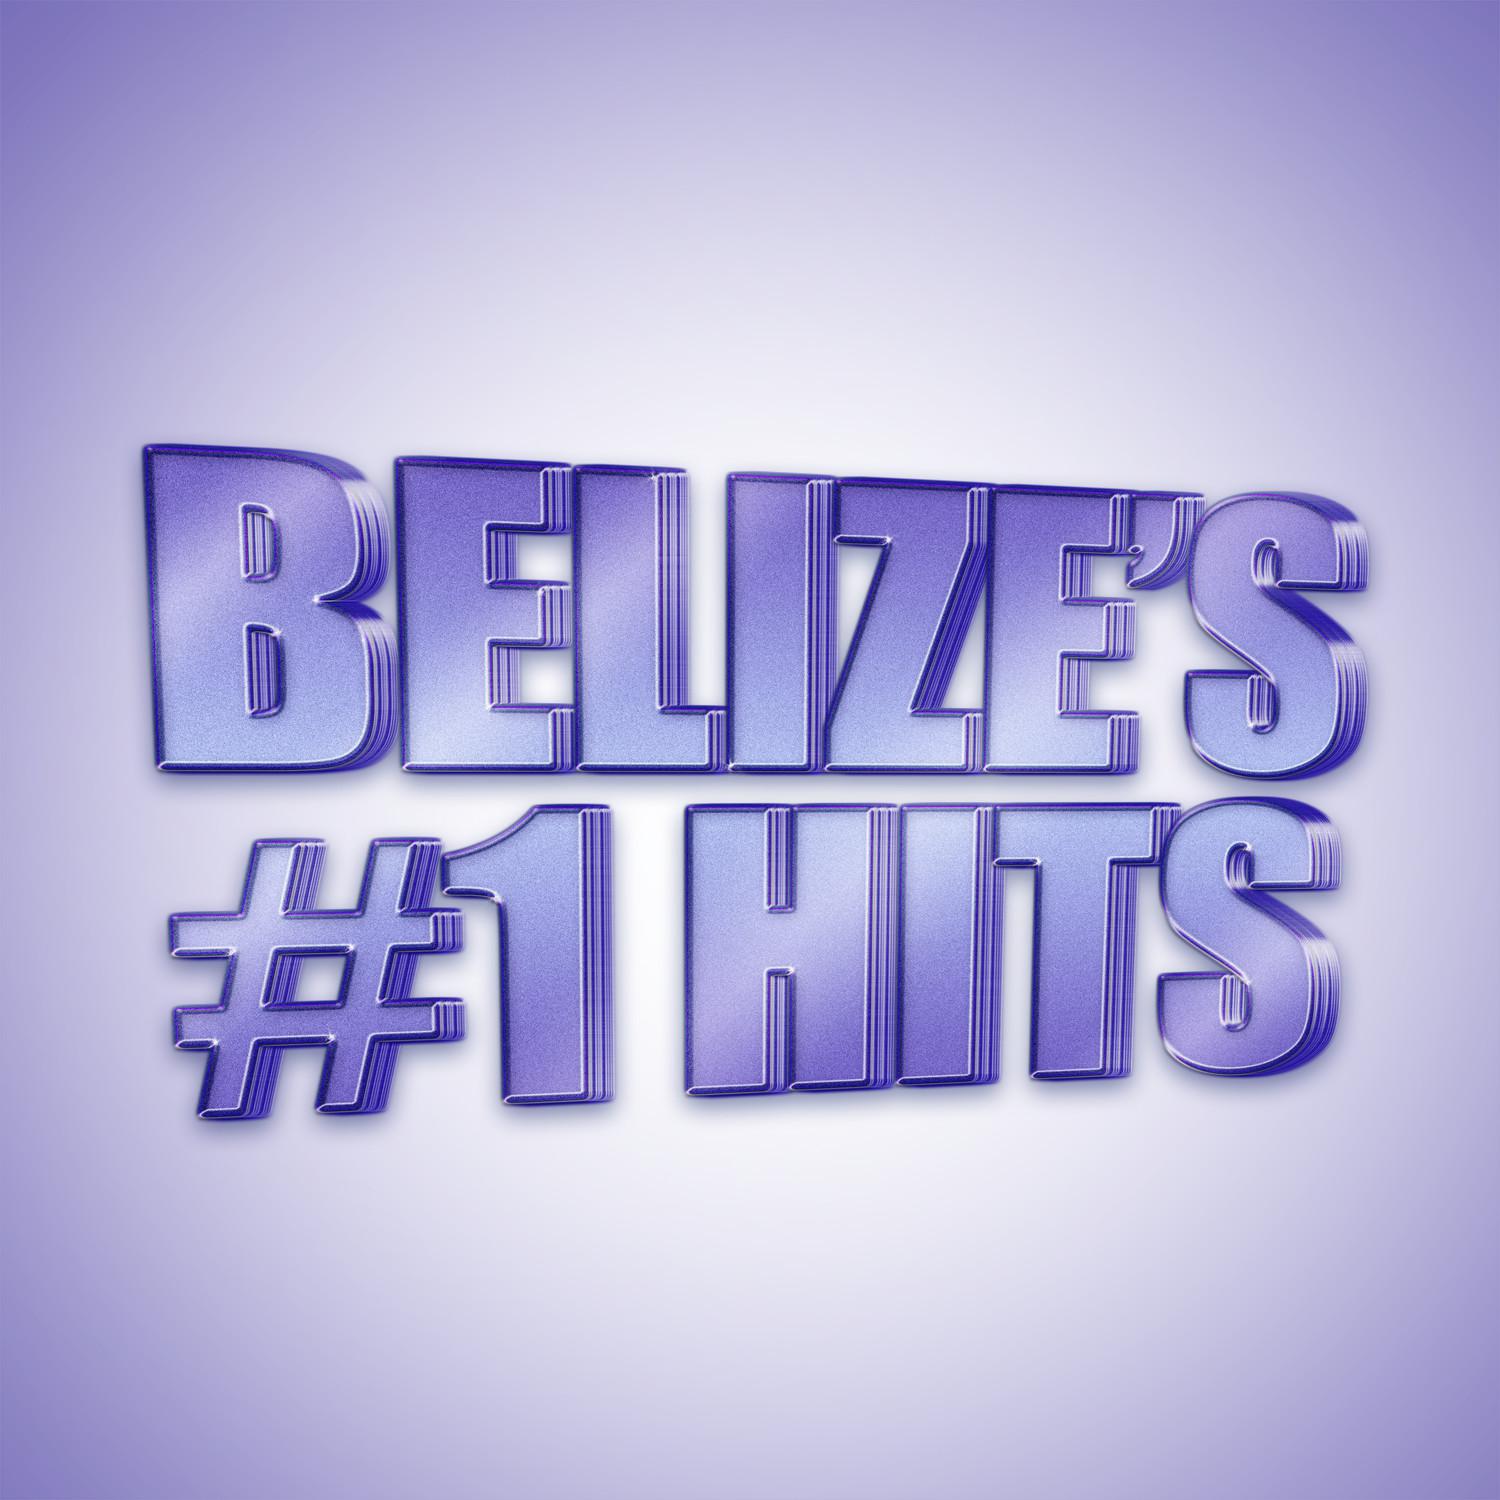 Belize's #1 Hits Commentary